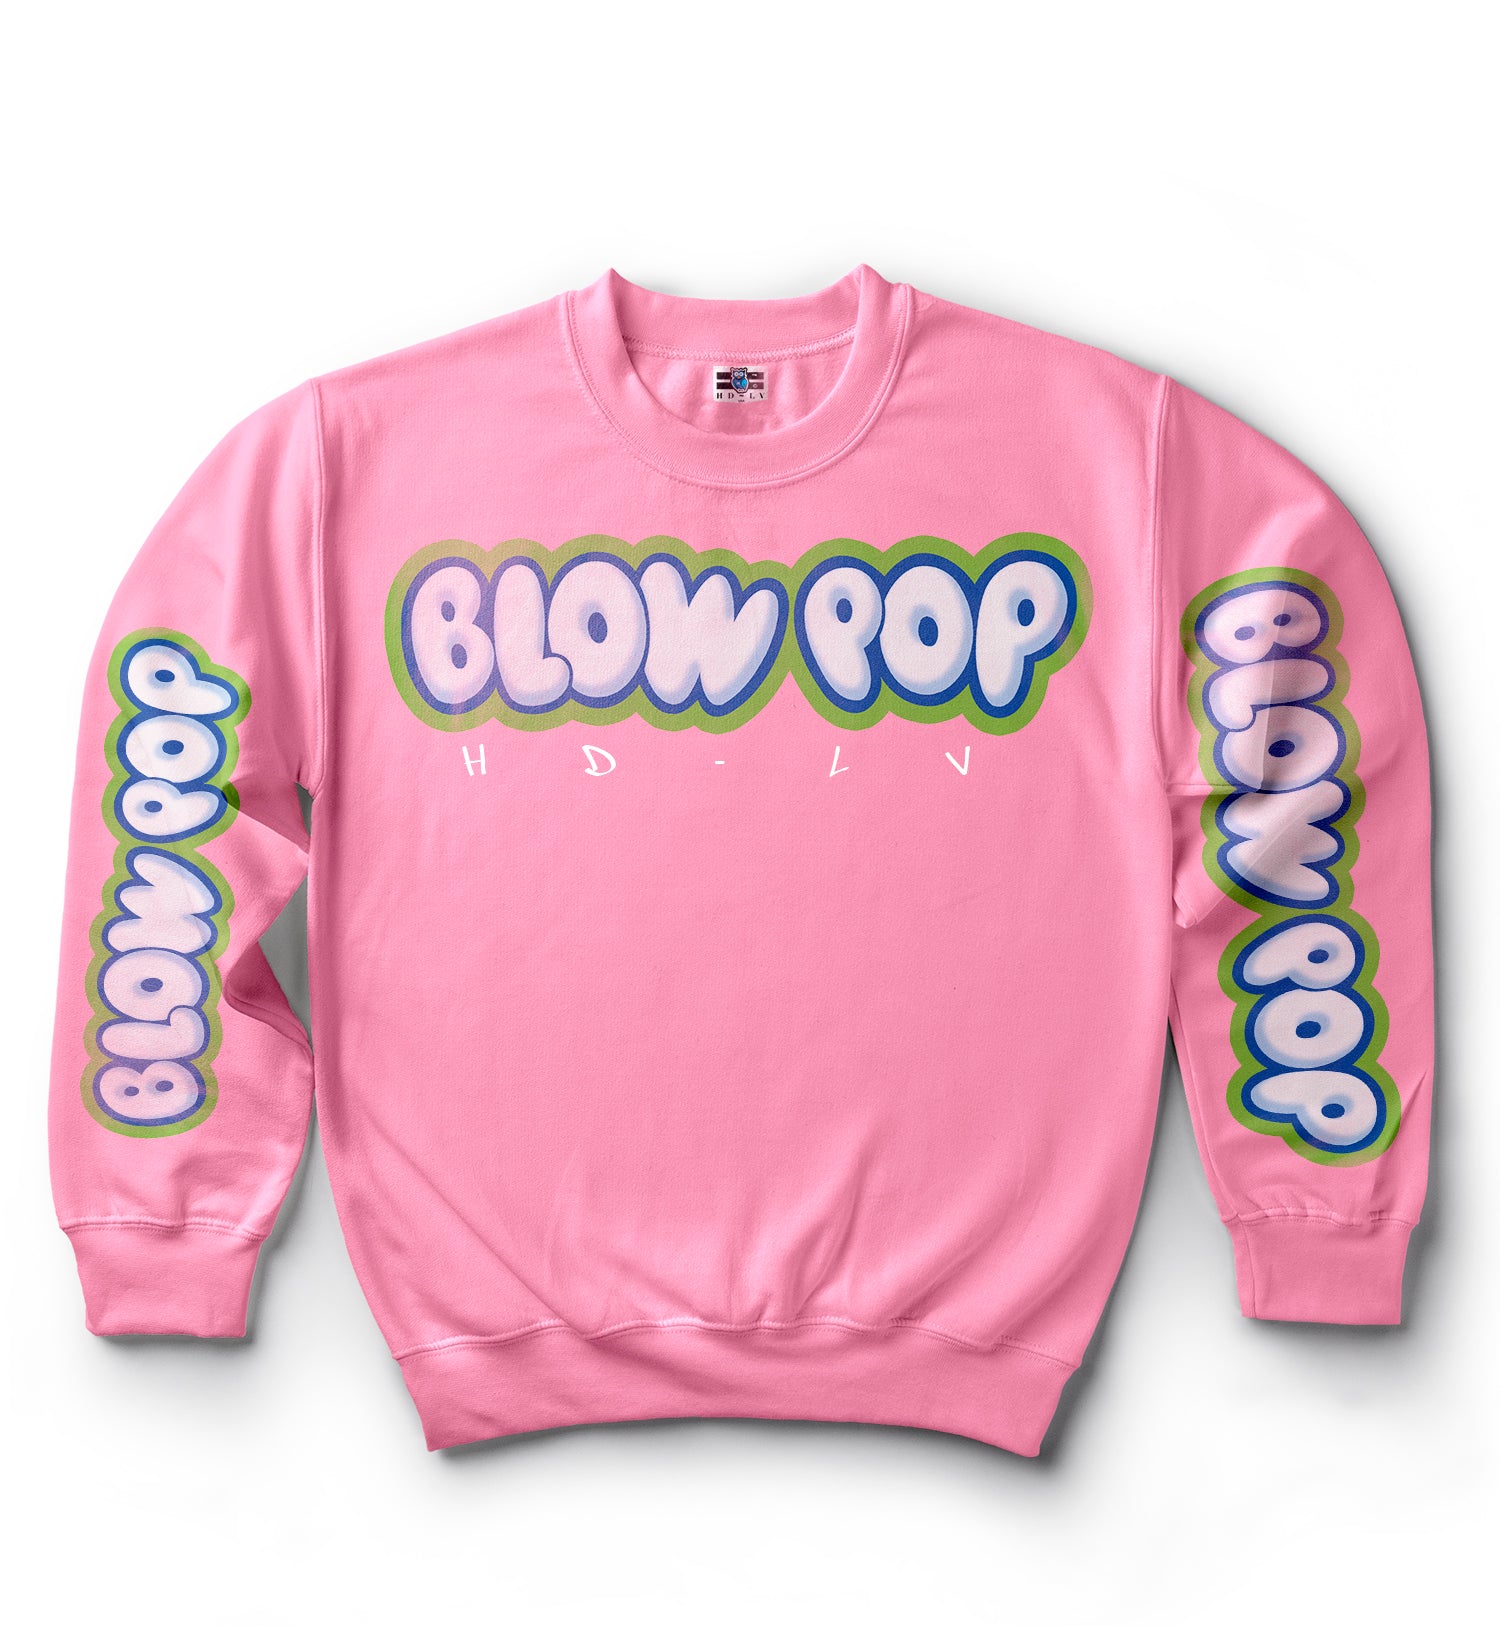 Shop and Buy 1990s Inspired Clothes | Tootsie Roll | Charms Blow Pop | Sweater | Watermelon